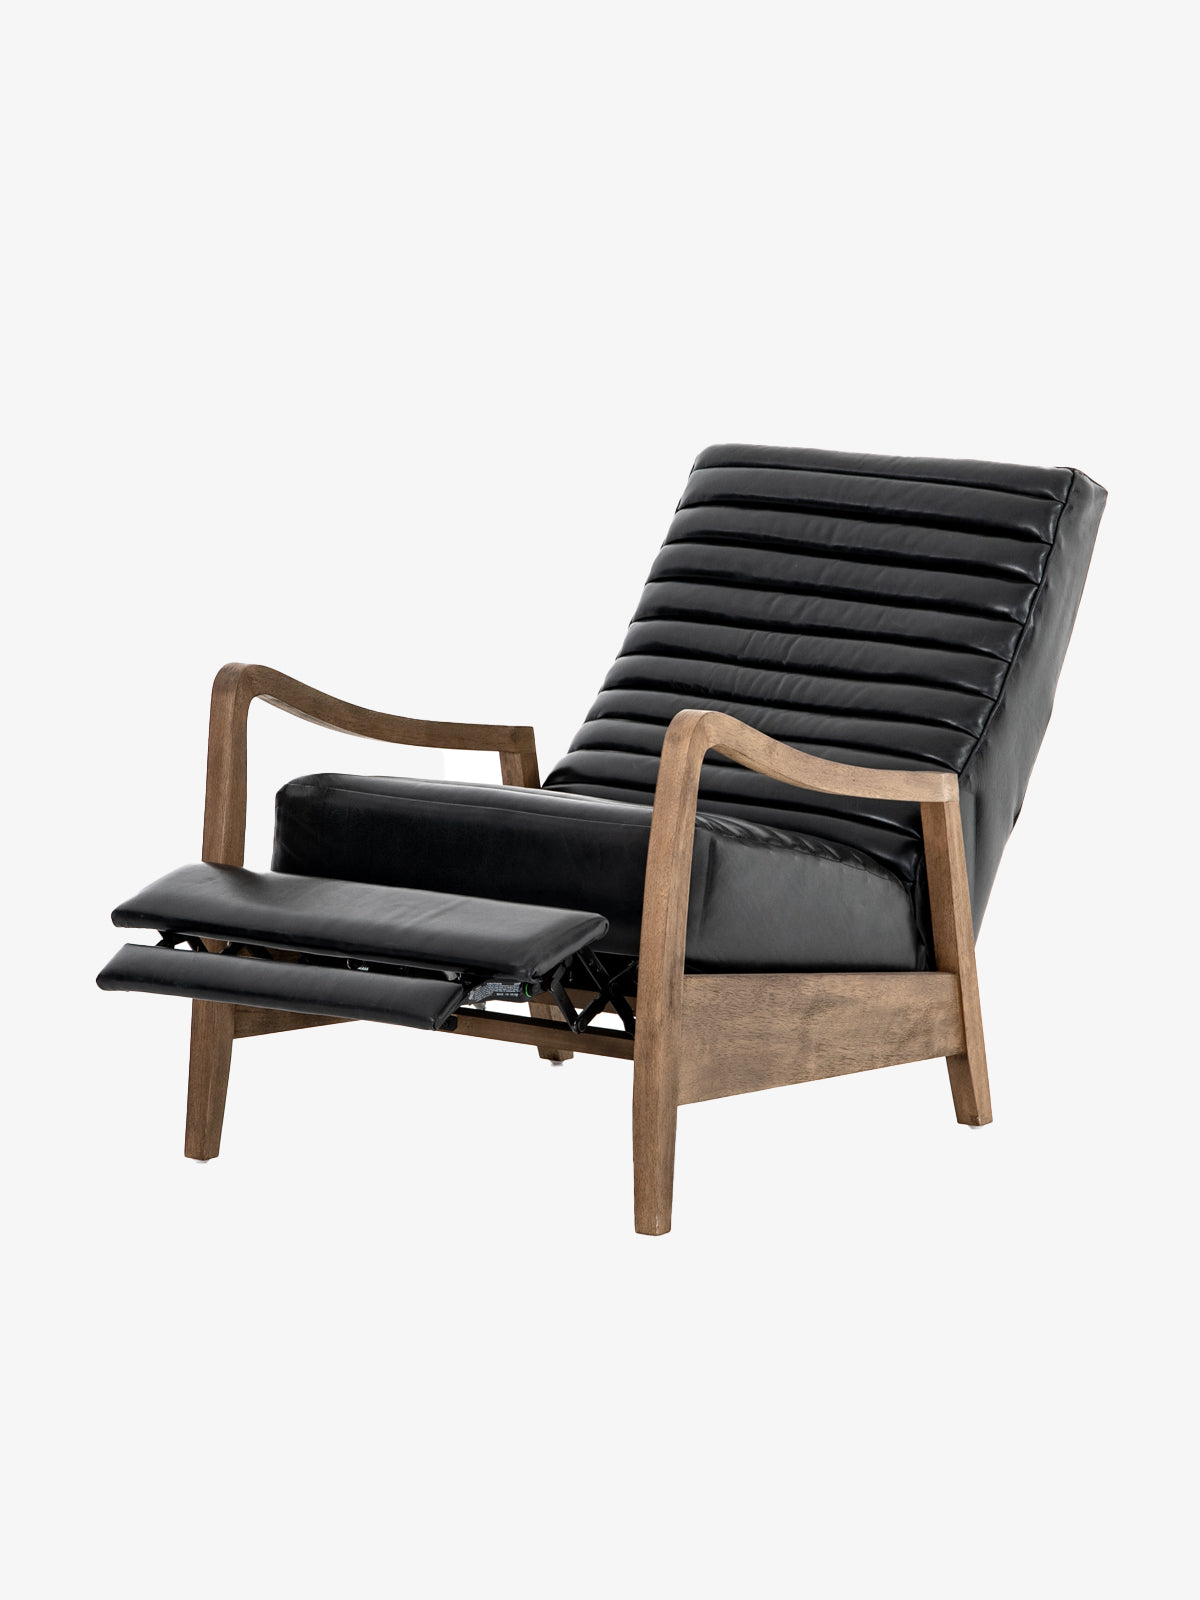 Chance Leather Recliner